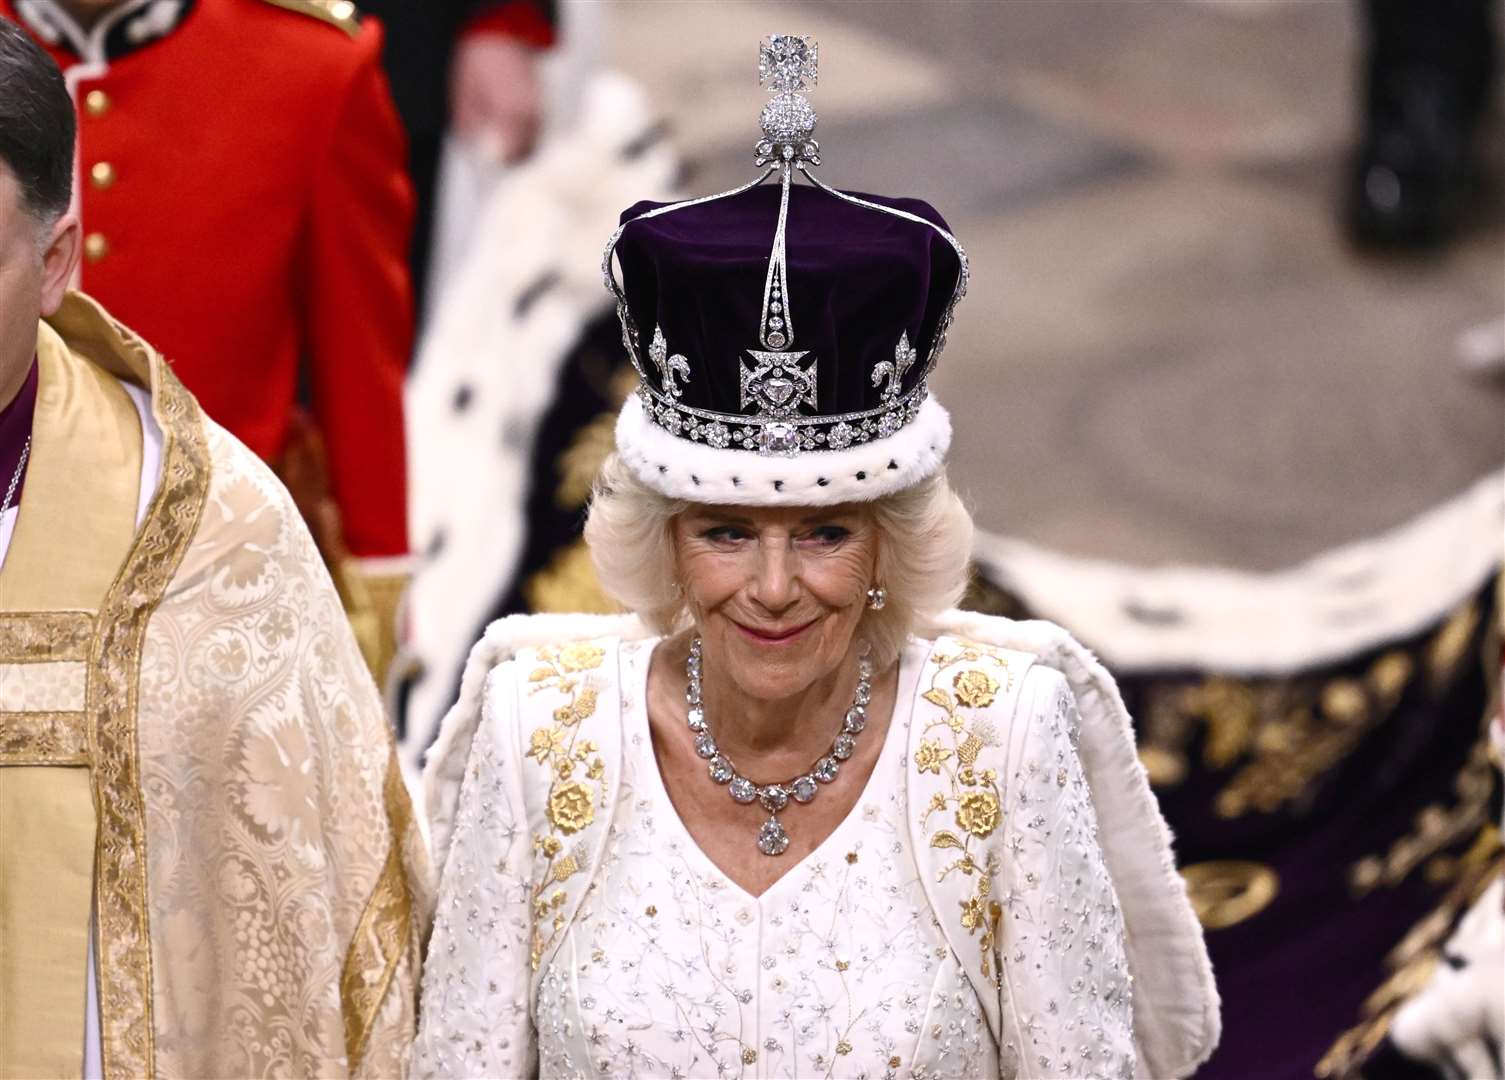 The Queen leaves Westminster Abbey after the coronation (Gareth Cattermole/PA)